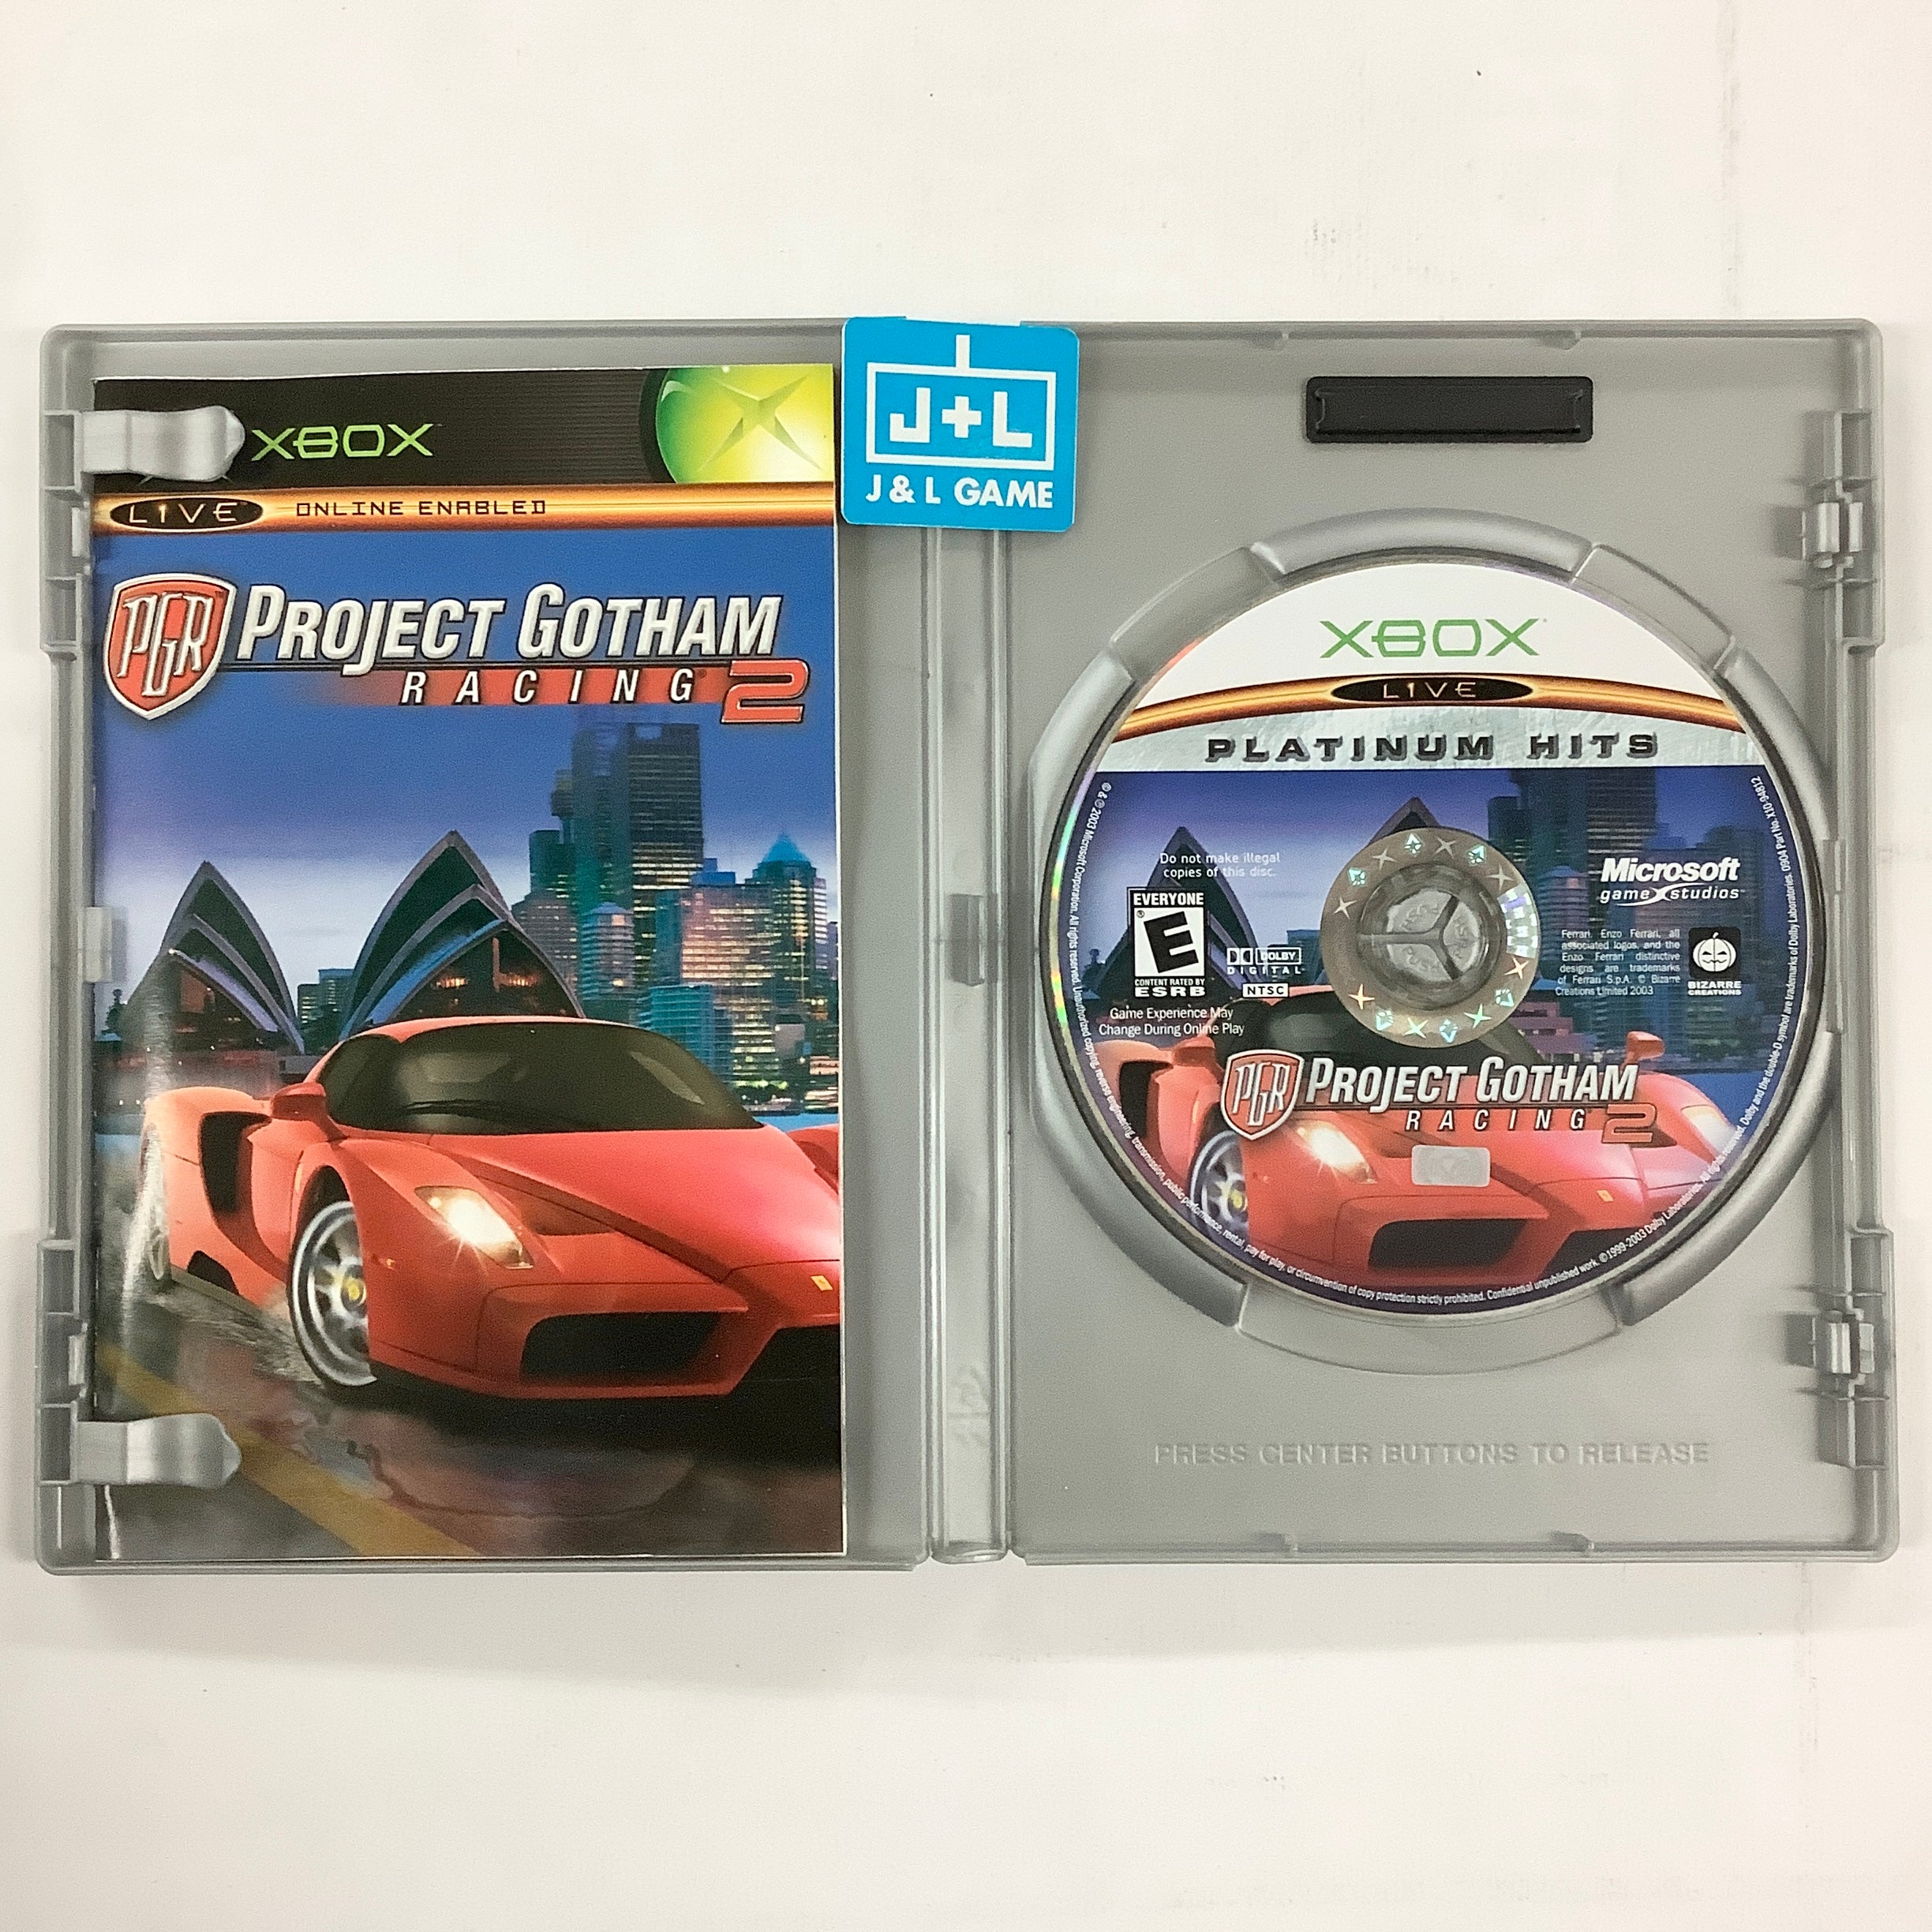 Project Gotham Racing 2 (Platinum Hits) - (XB) Xbox [Pre-Owned] Video Games Microsoft Game Studios   